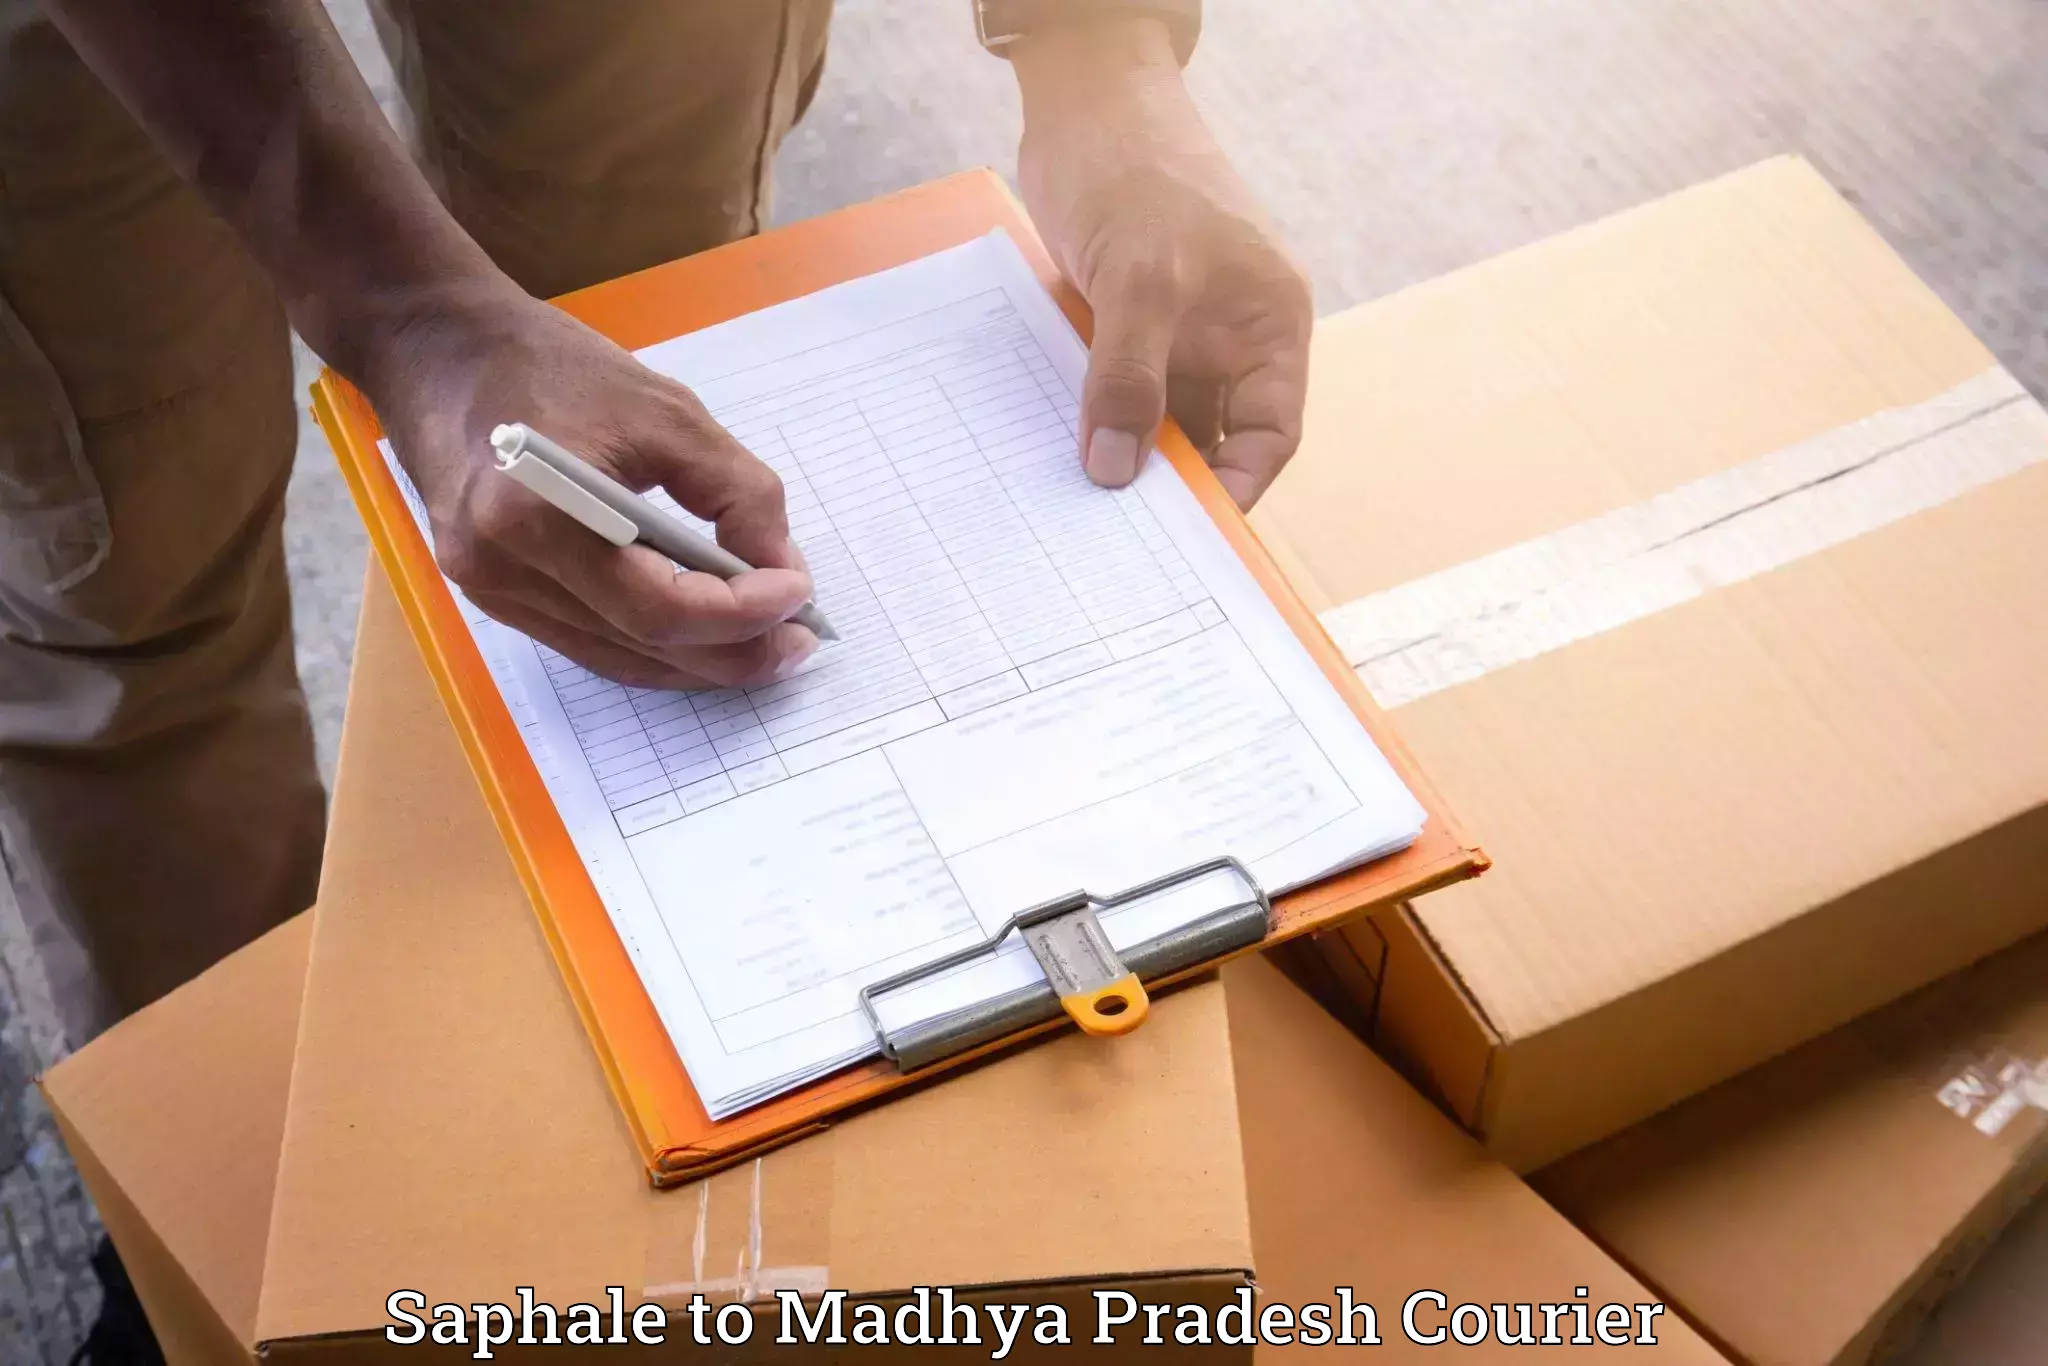 Furniture relocation experts Saphale to Nainpur